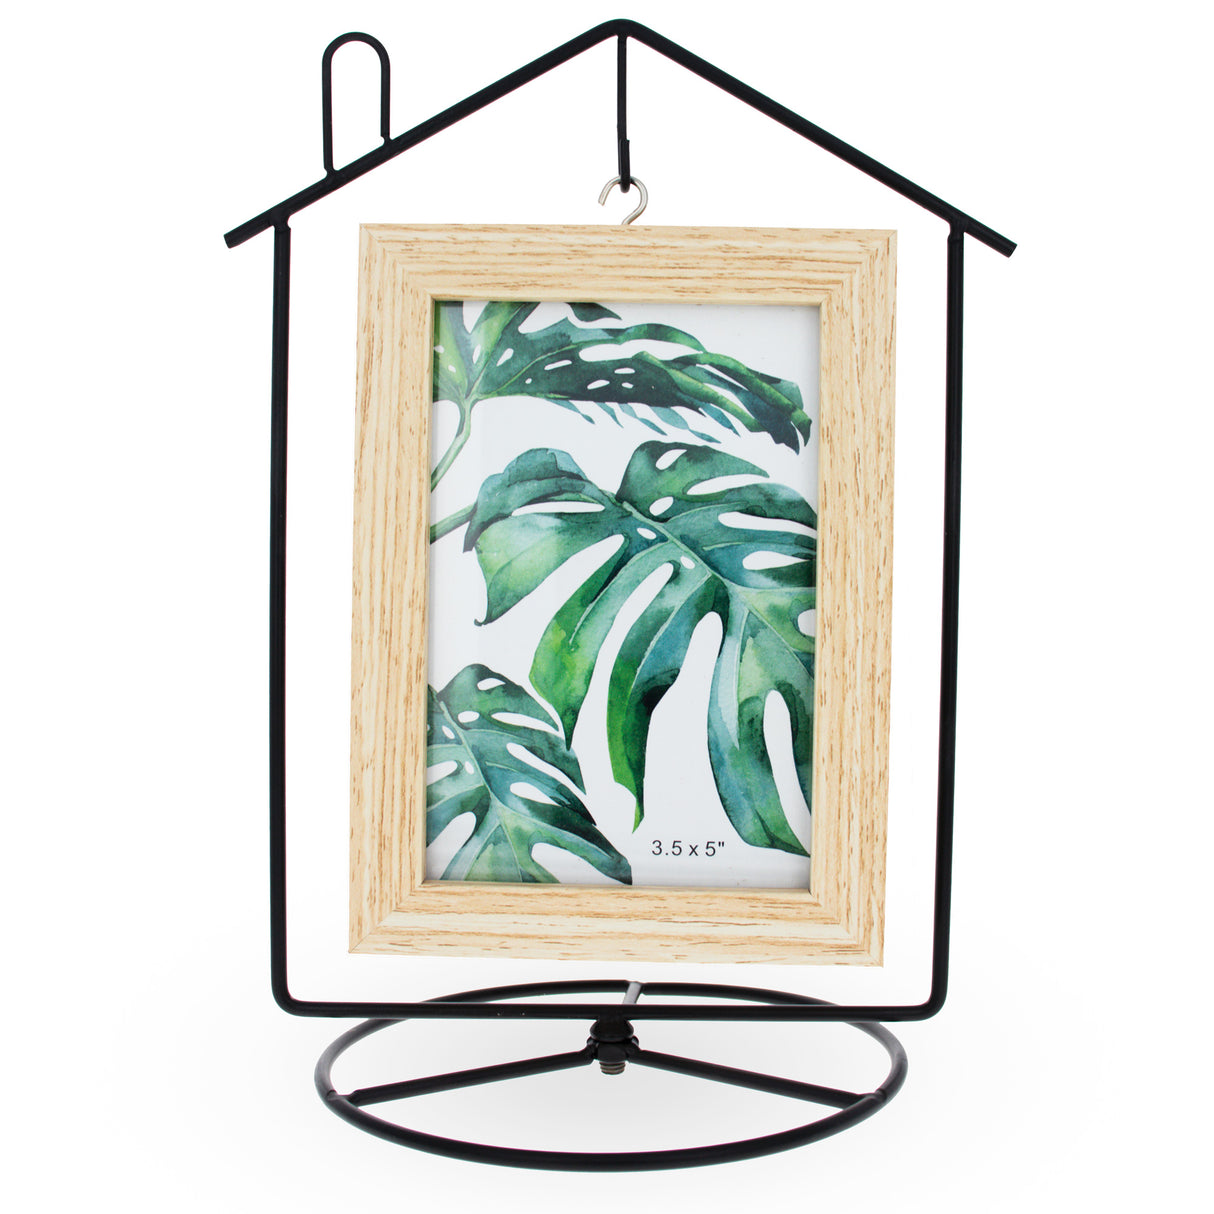 Metal Black House-Shaped Picture Frame and Ornament Stand in Black color